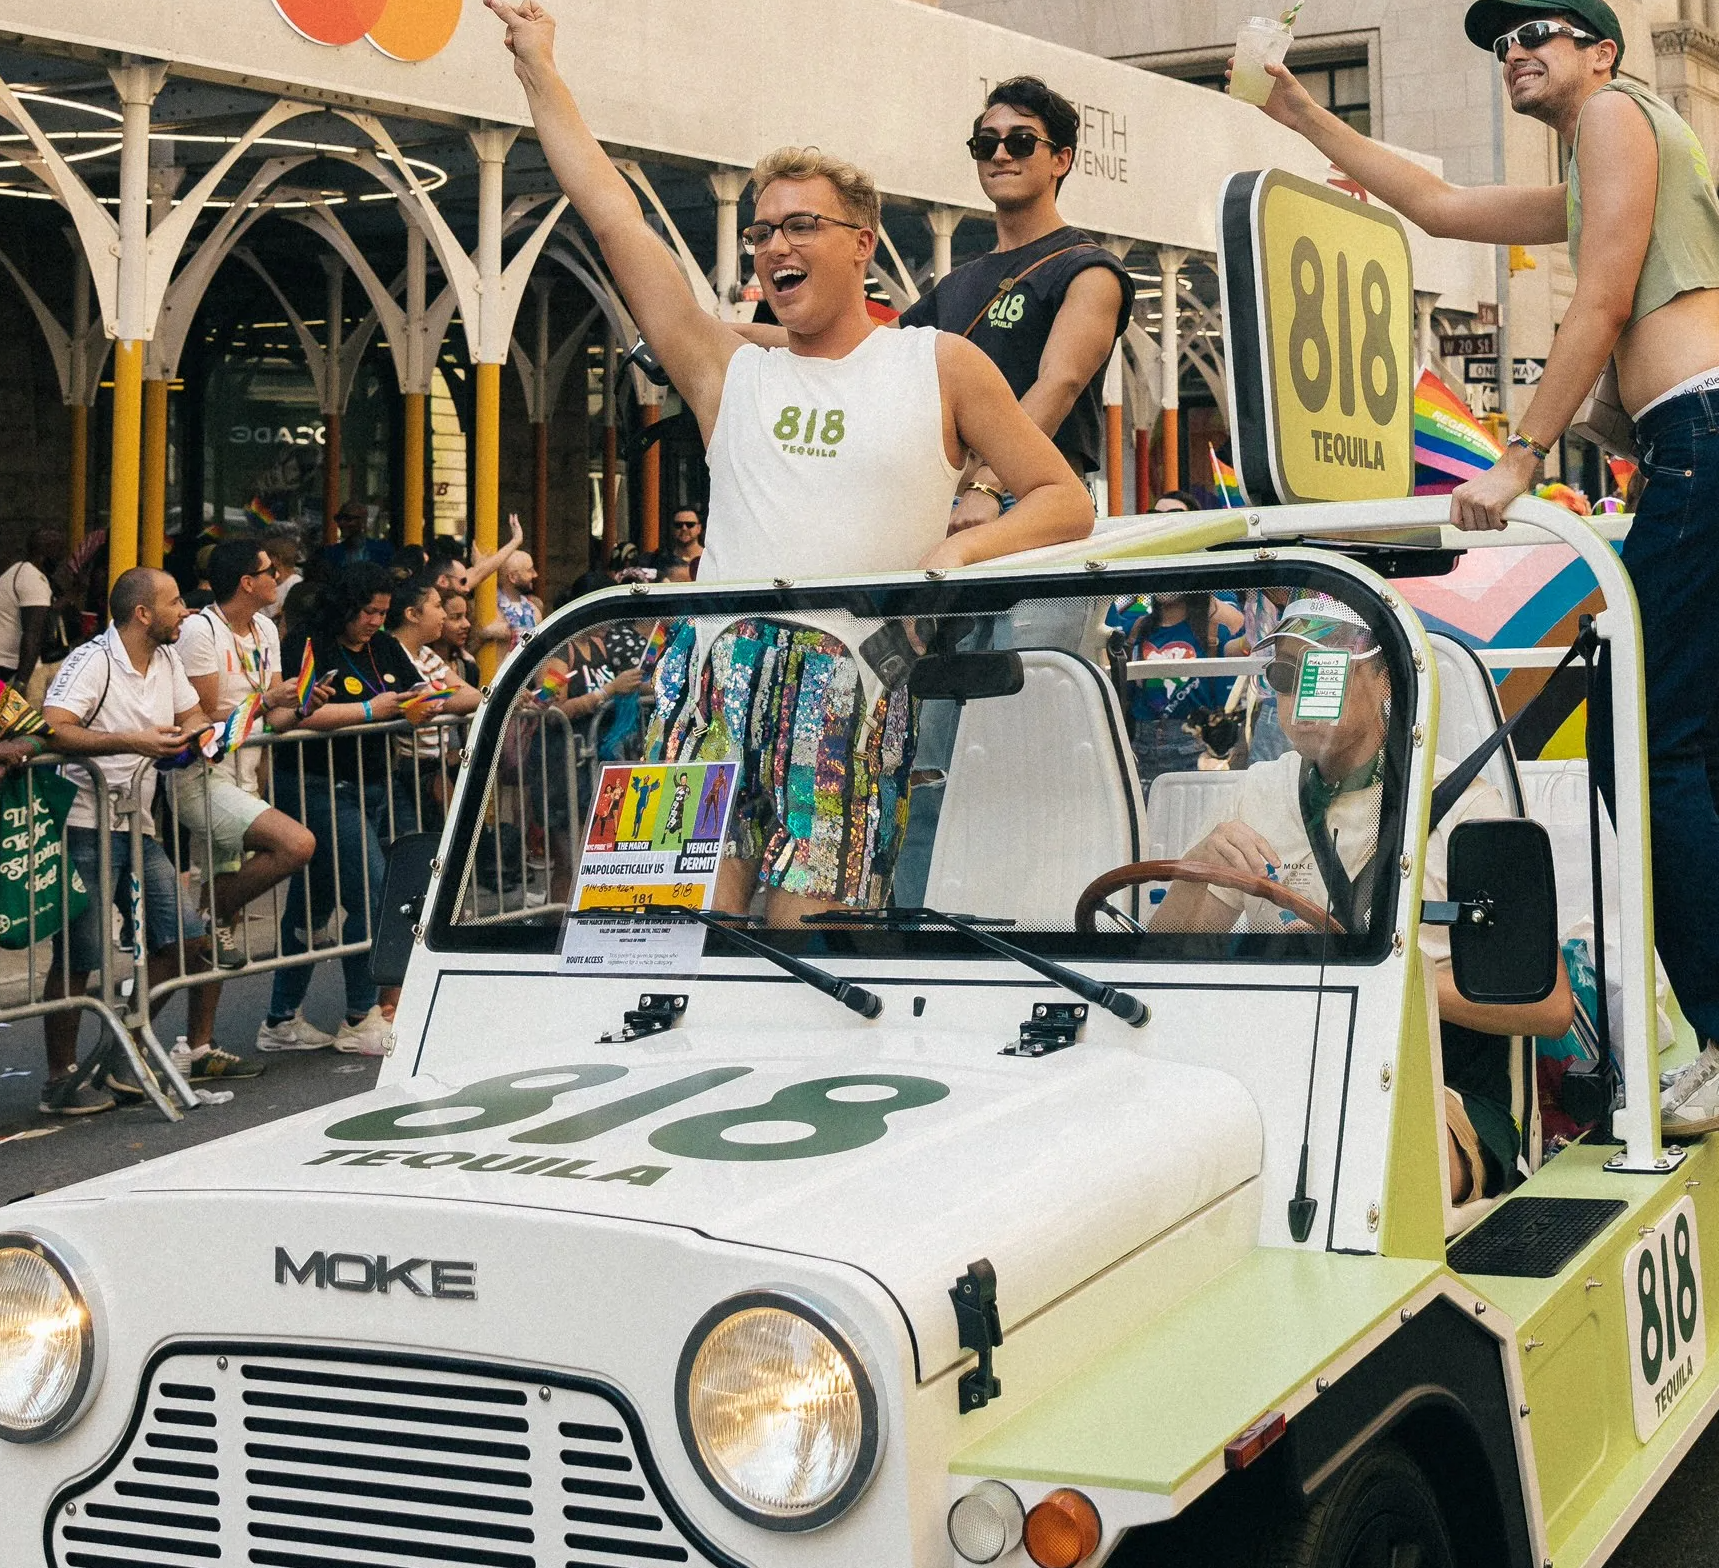 Guests celebrating NYC Pride inside of an 818-branded Moke vehicle.